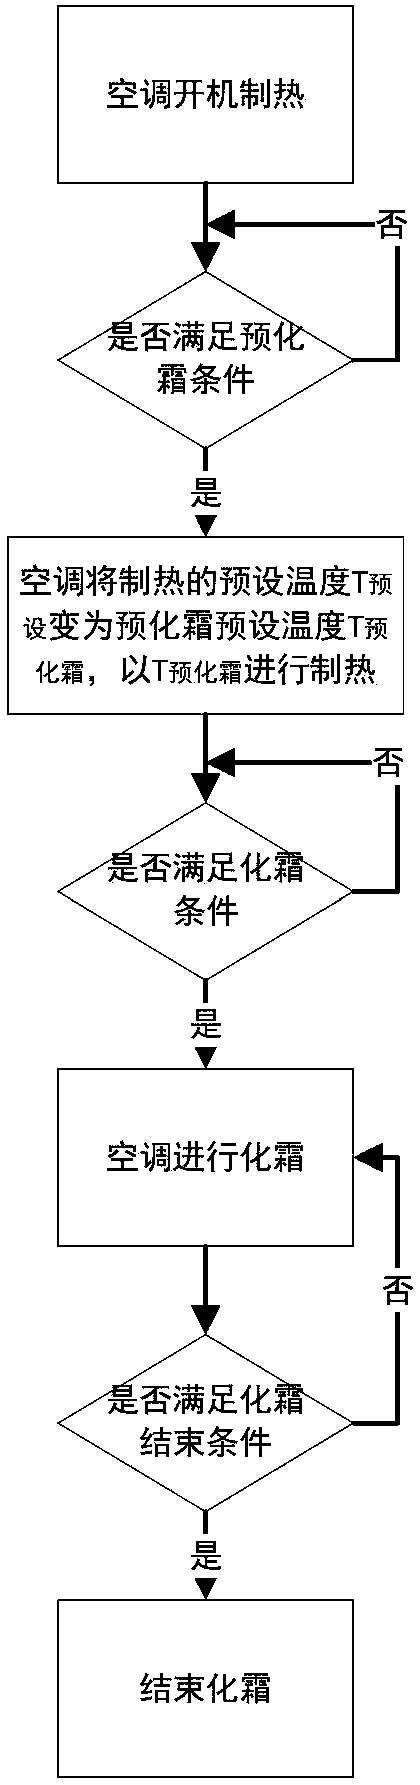 Intelligent defrosting method of variable frequency air conditioner